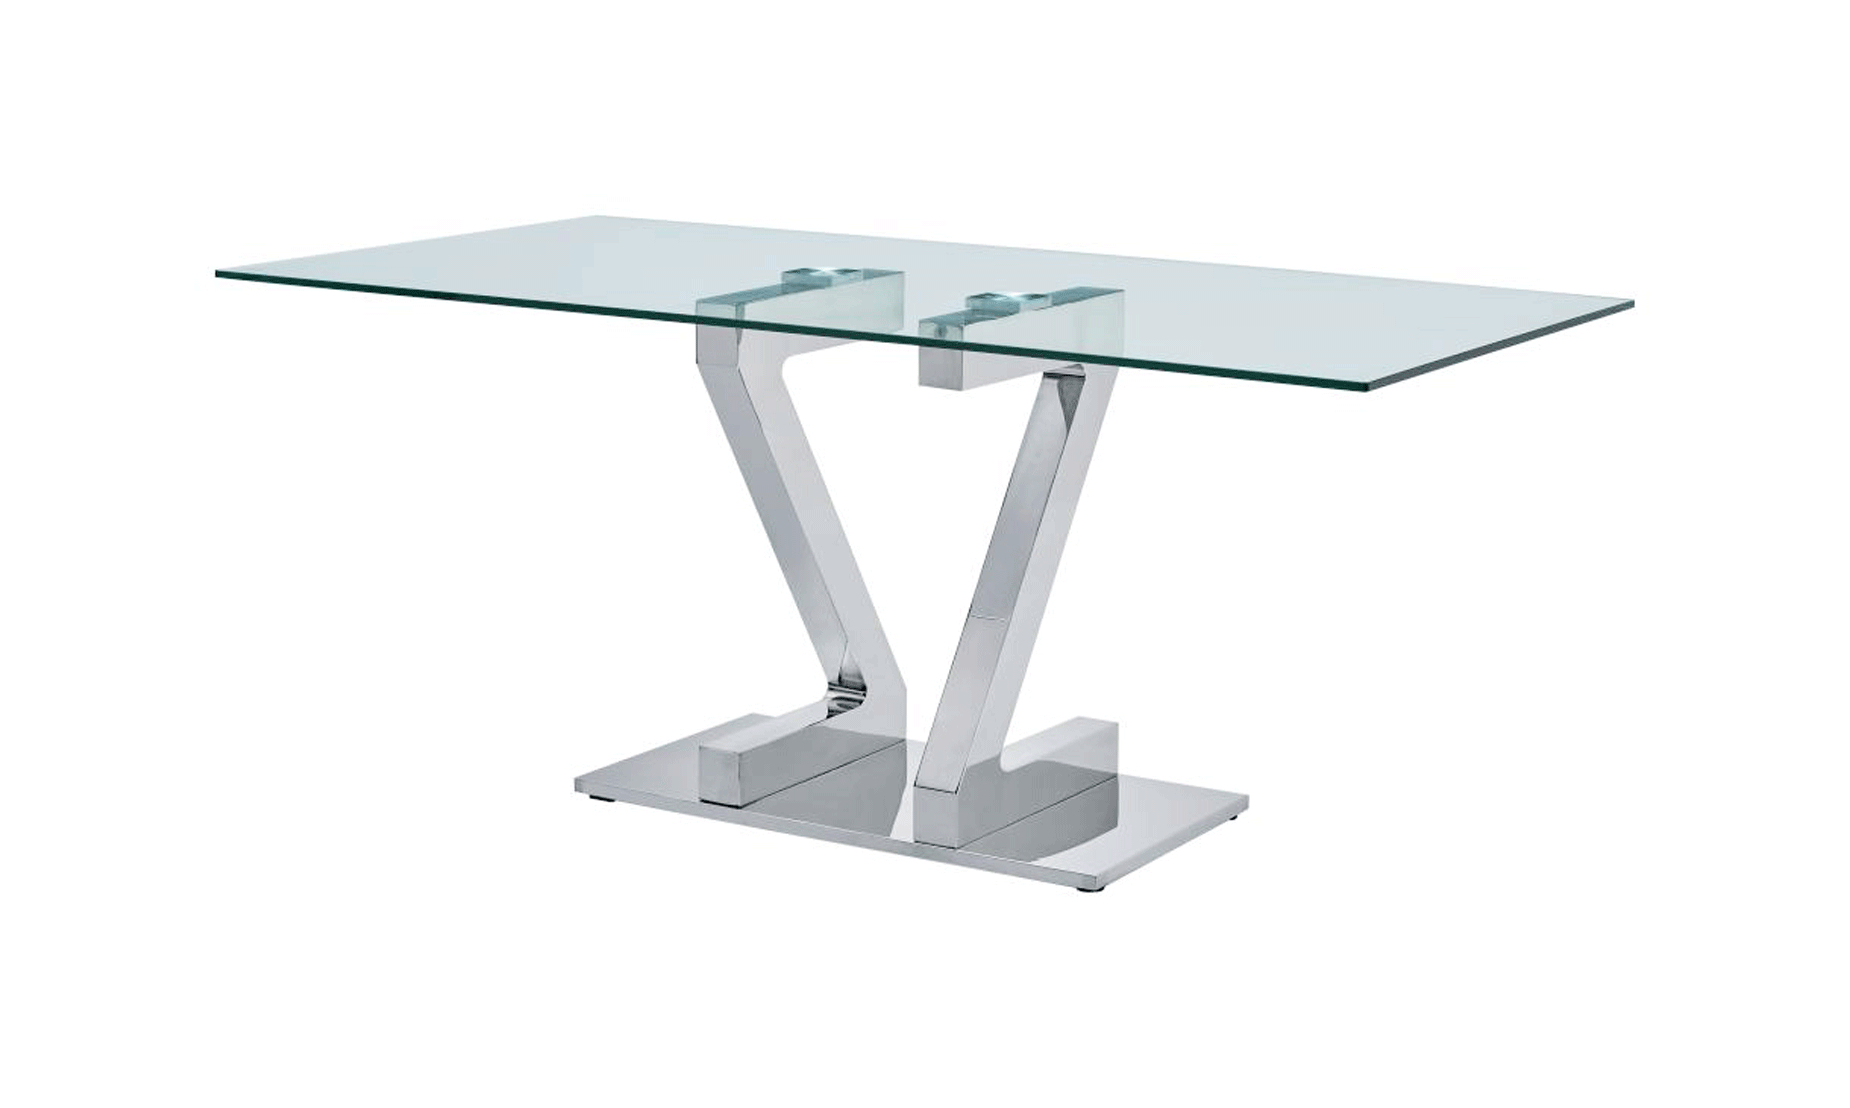 ZZ Dining Table - Euro Living Furniture